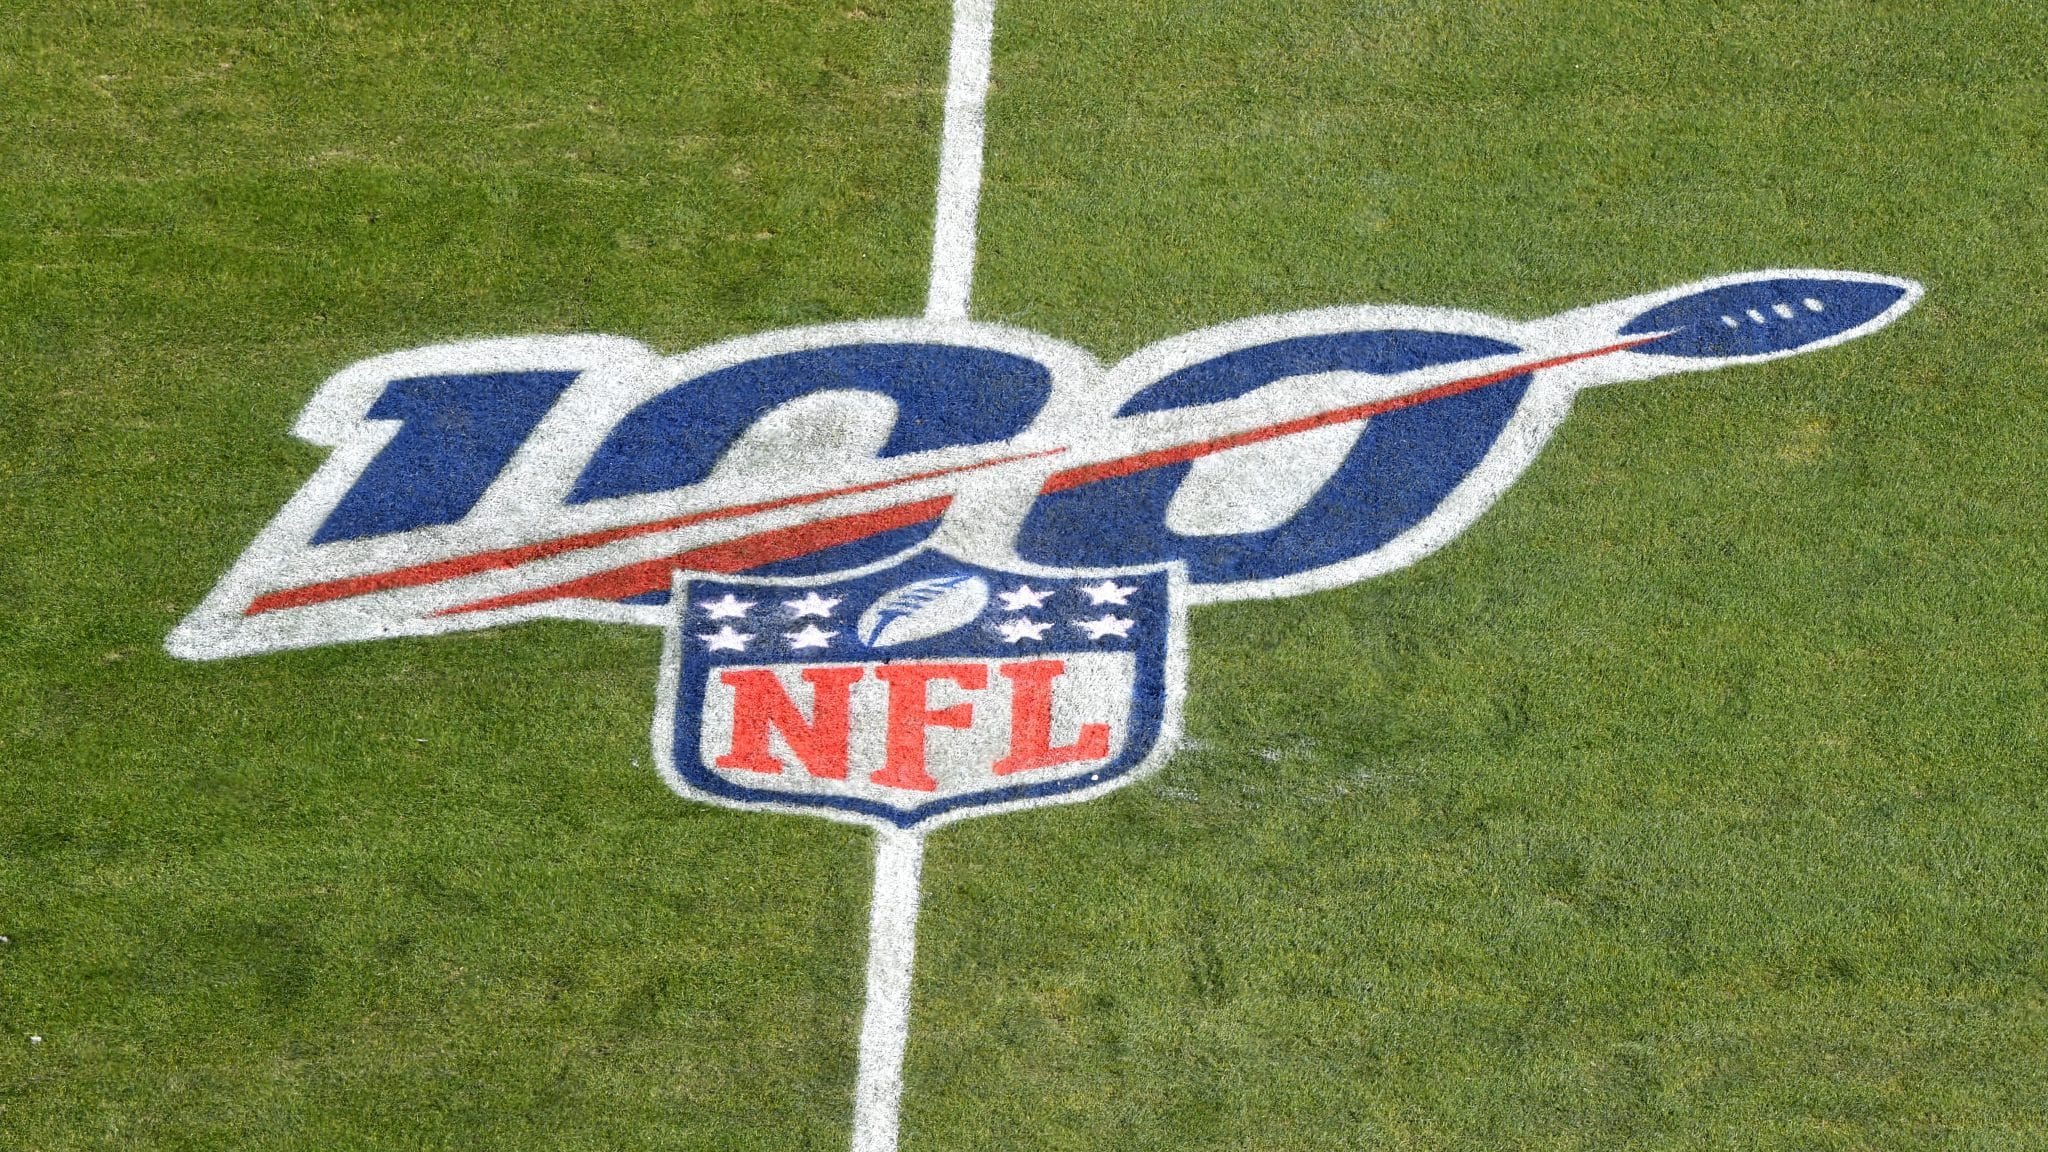 KANSAS CITY, MISSOURI - JANUARY 19: The NFL 100 year anniversary logo is seen on the field before the AFC Championship Game between the Kansas City Chiefs and the Tennessee Titans at Arrowhead Stadium on January 19, 2020 in Kansas City, Missouri.